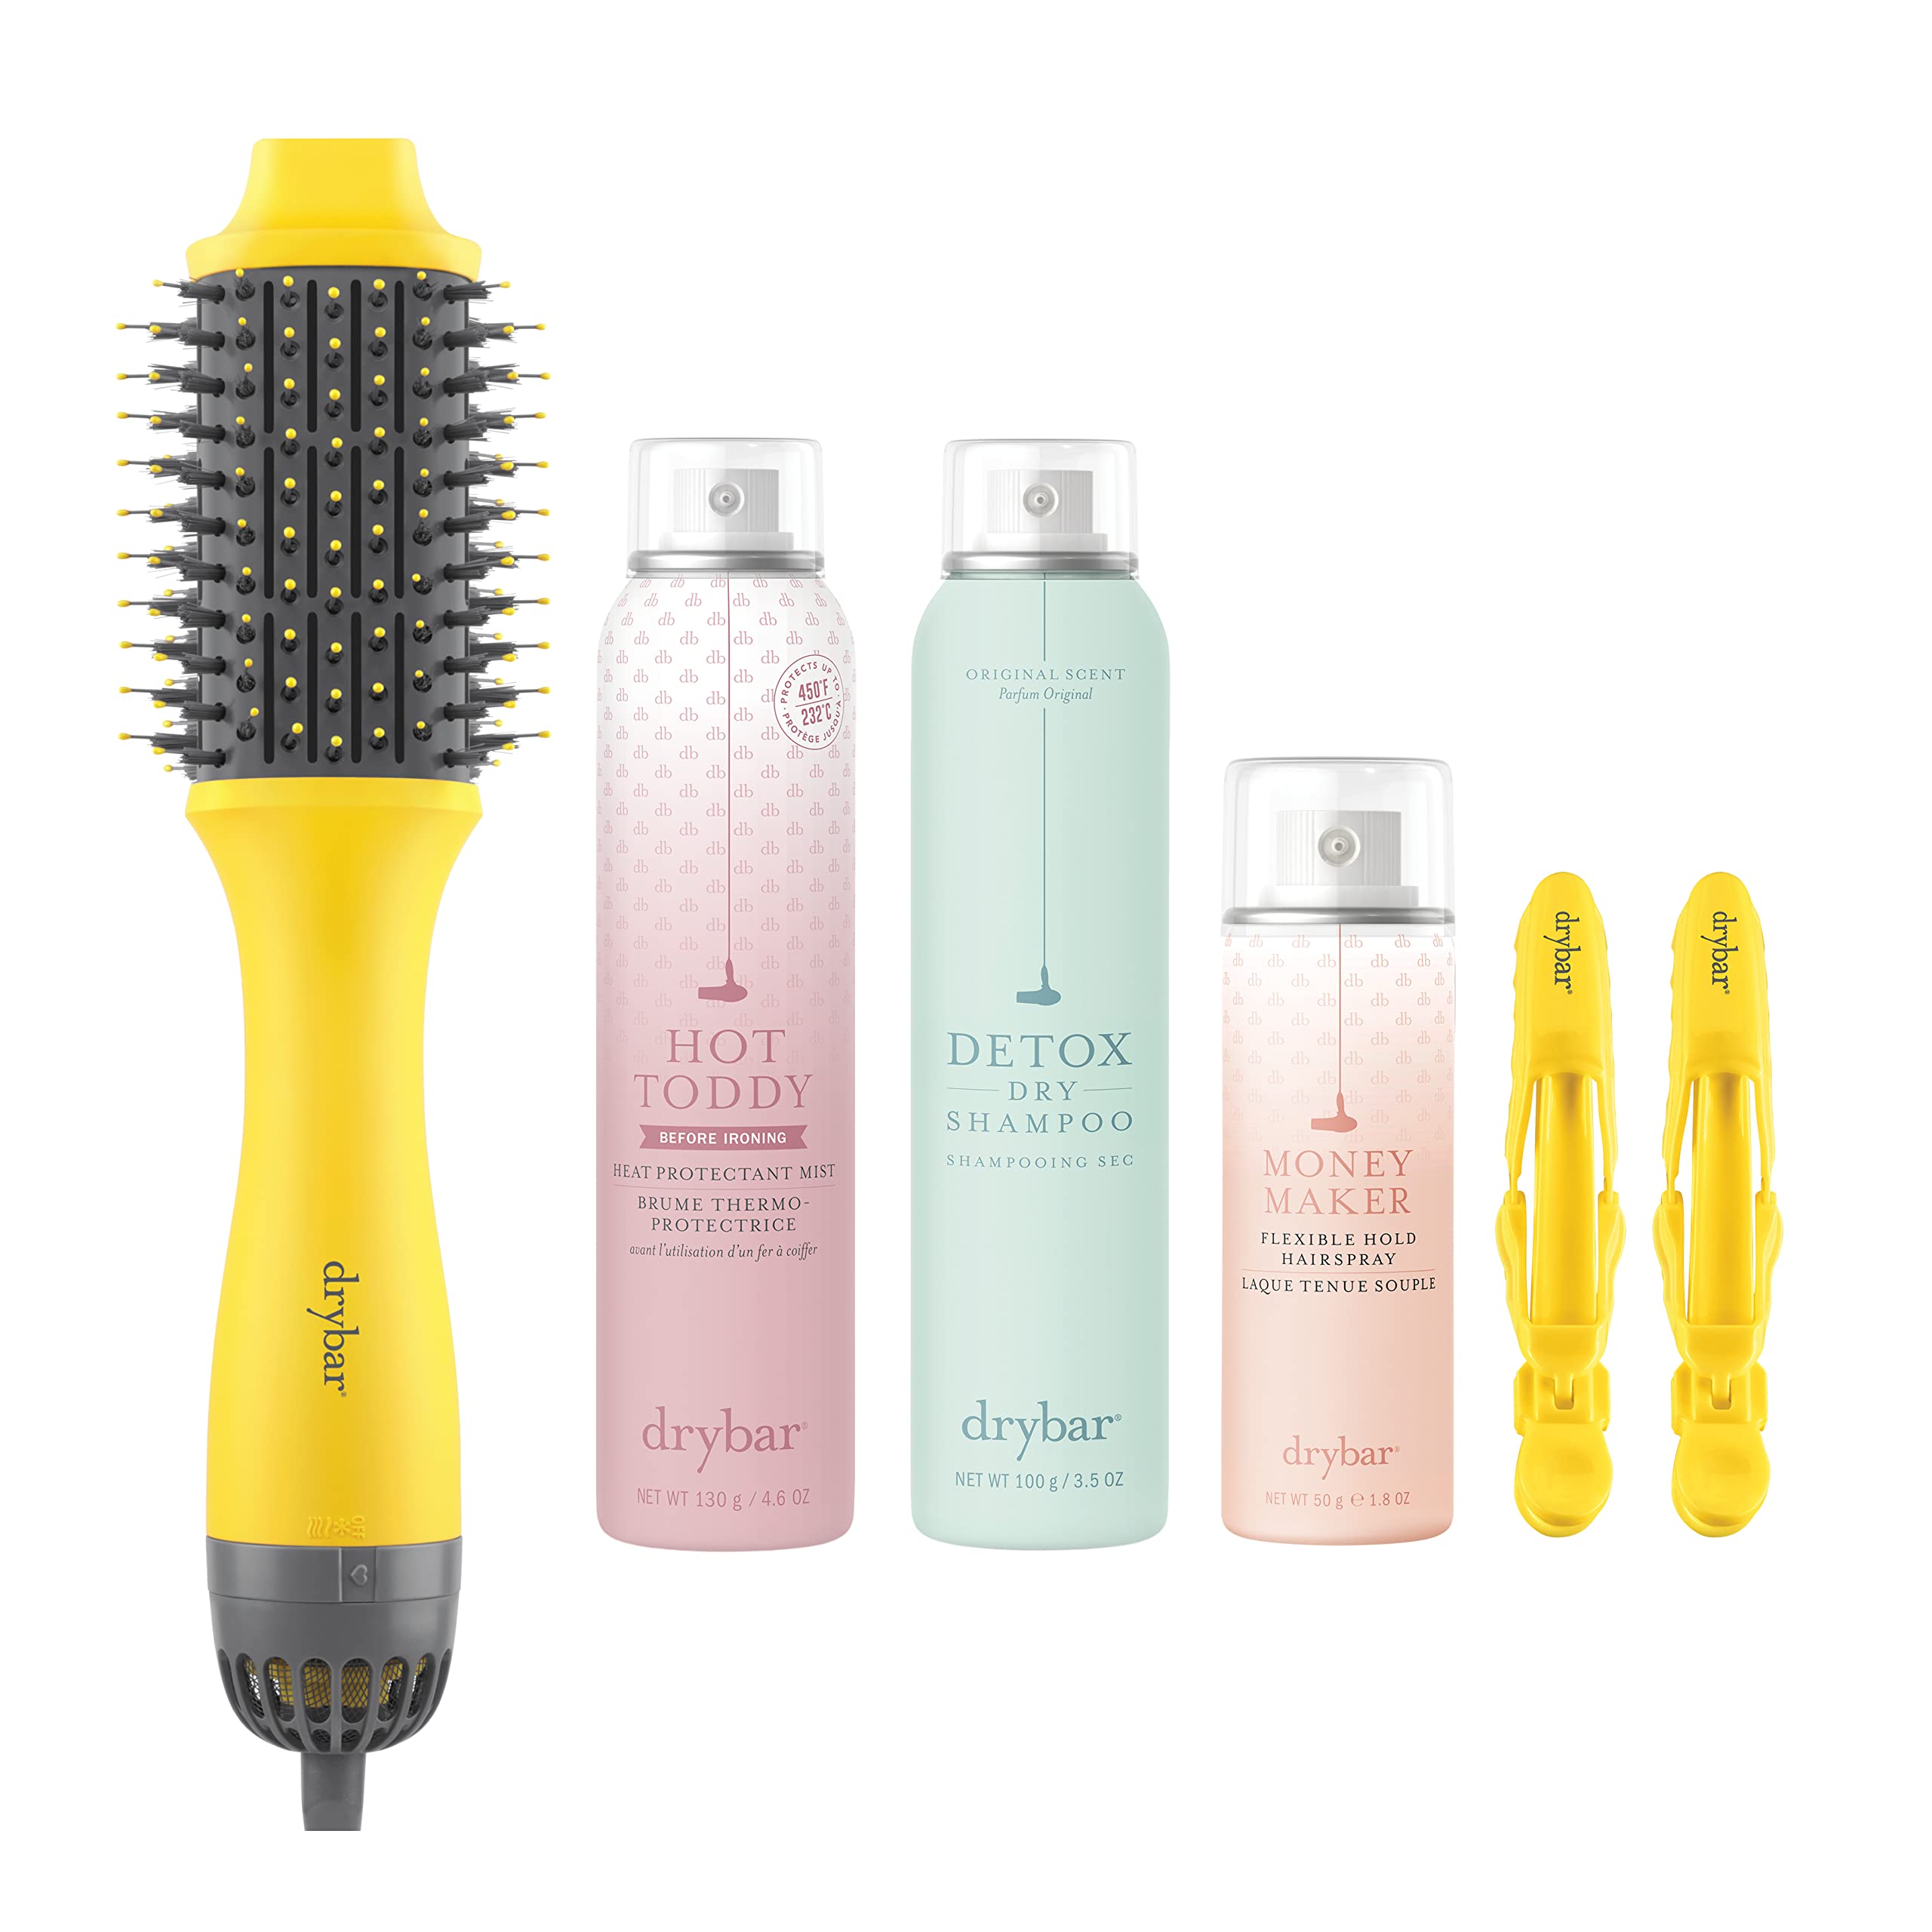 6-Piece Drybar The Double Shot Jackpot Styling Smooth Hair Essentials Set w/ Blow Dryer Brush, Heat Protectant, Dry Shampoo, Hair Spray & Clips $77.50 + Free Shipping